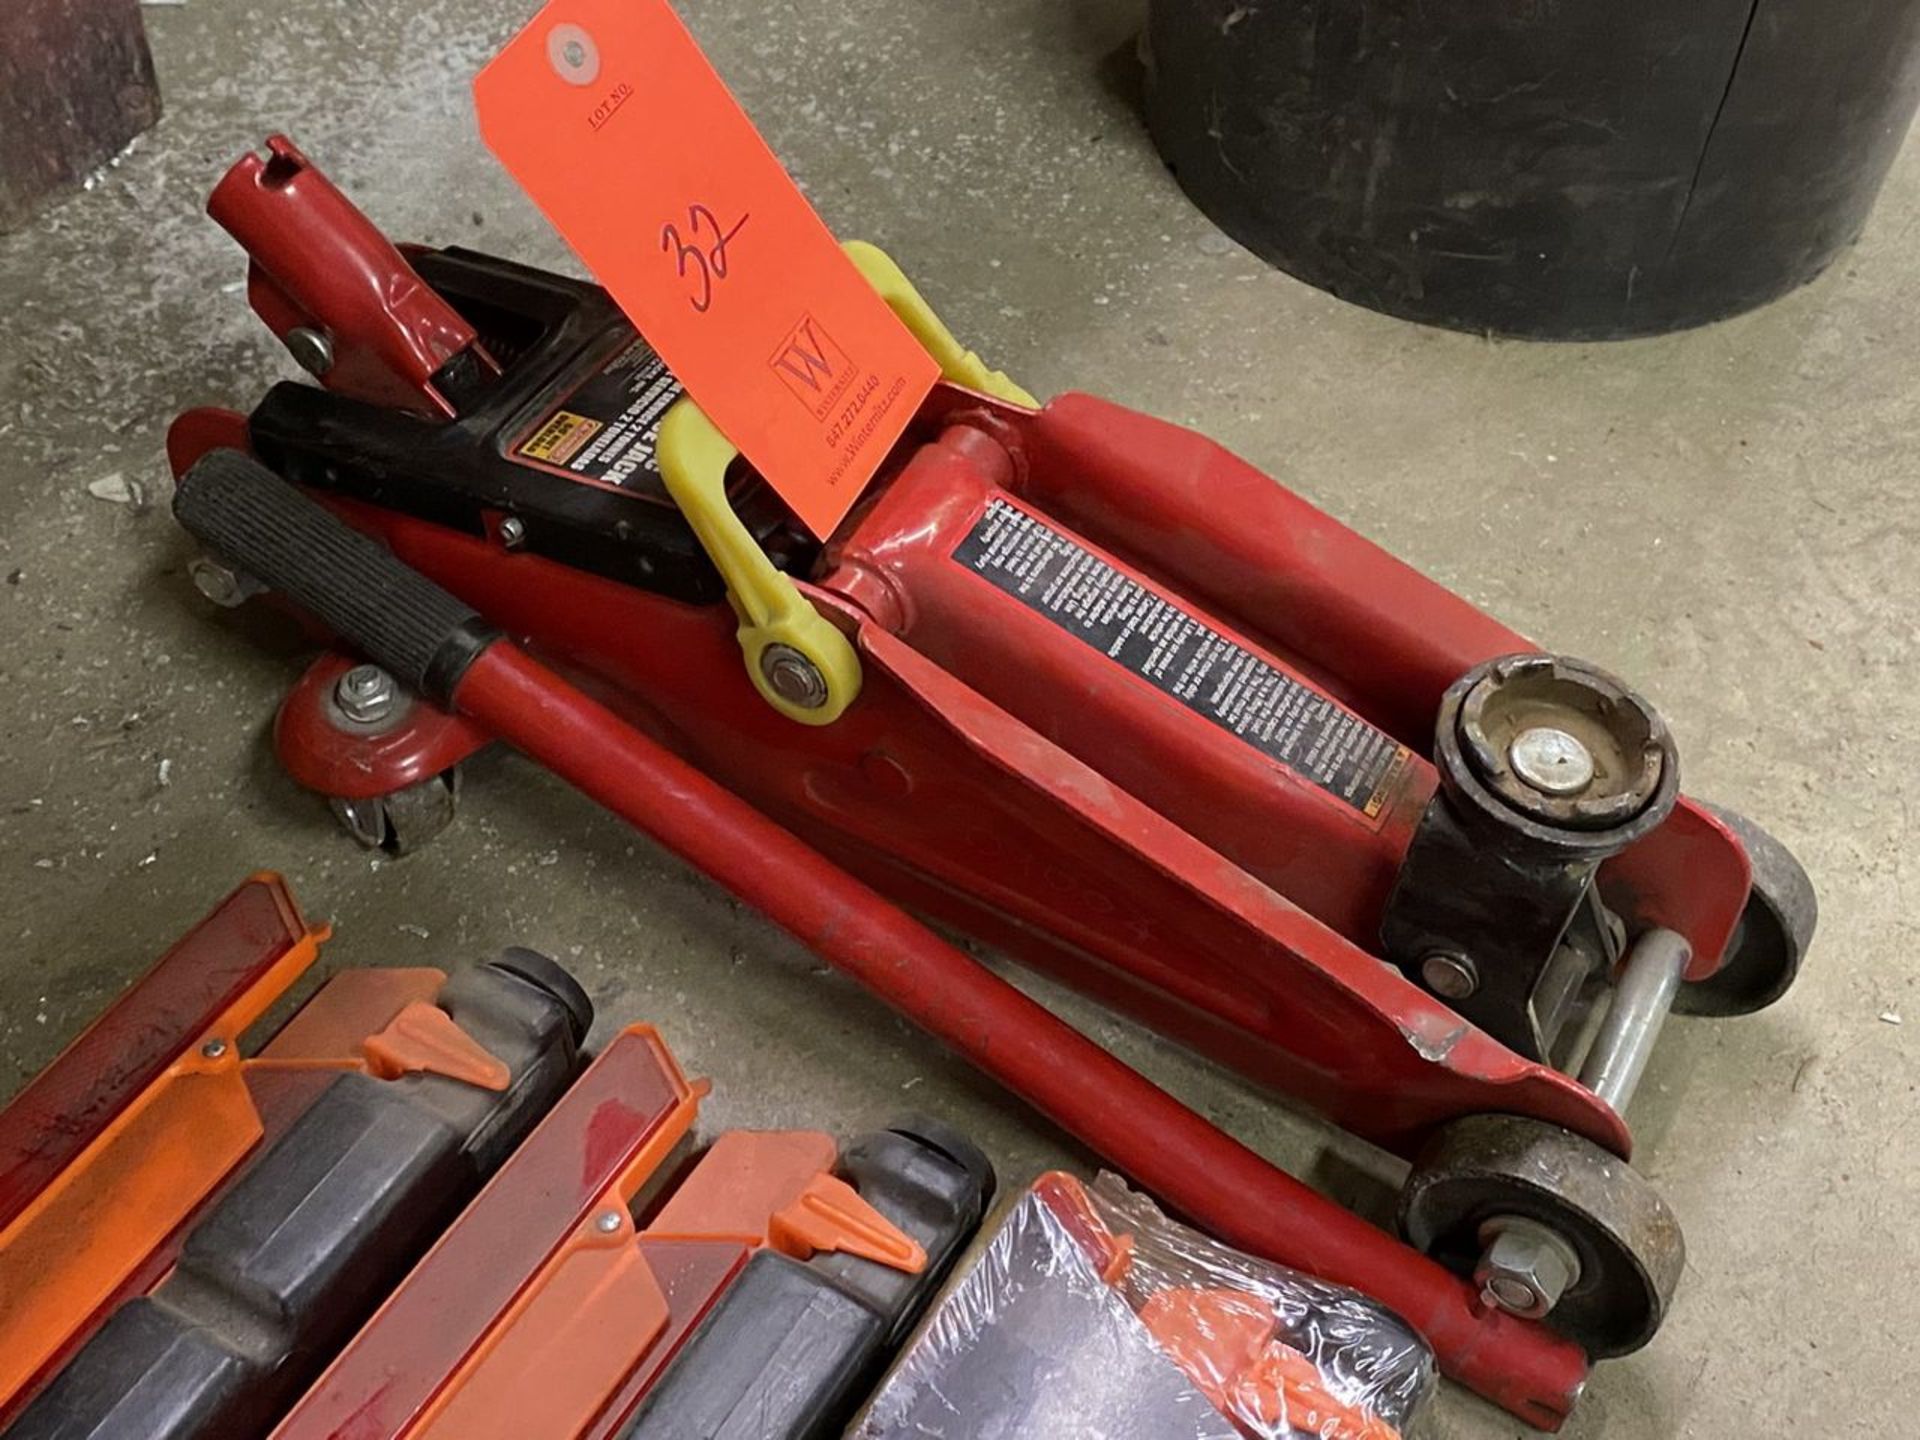 Big Red 2-Ton Cap. Hydraulic Service Jack; with (3) Emergency Road Triangles - Image 2 of 3